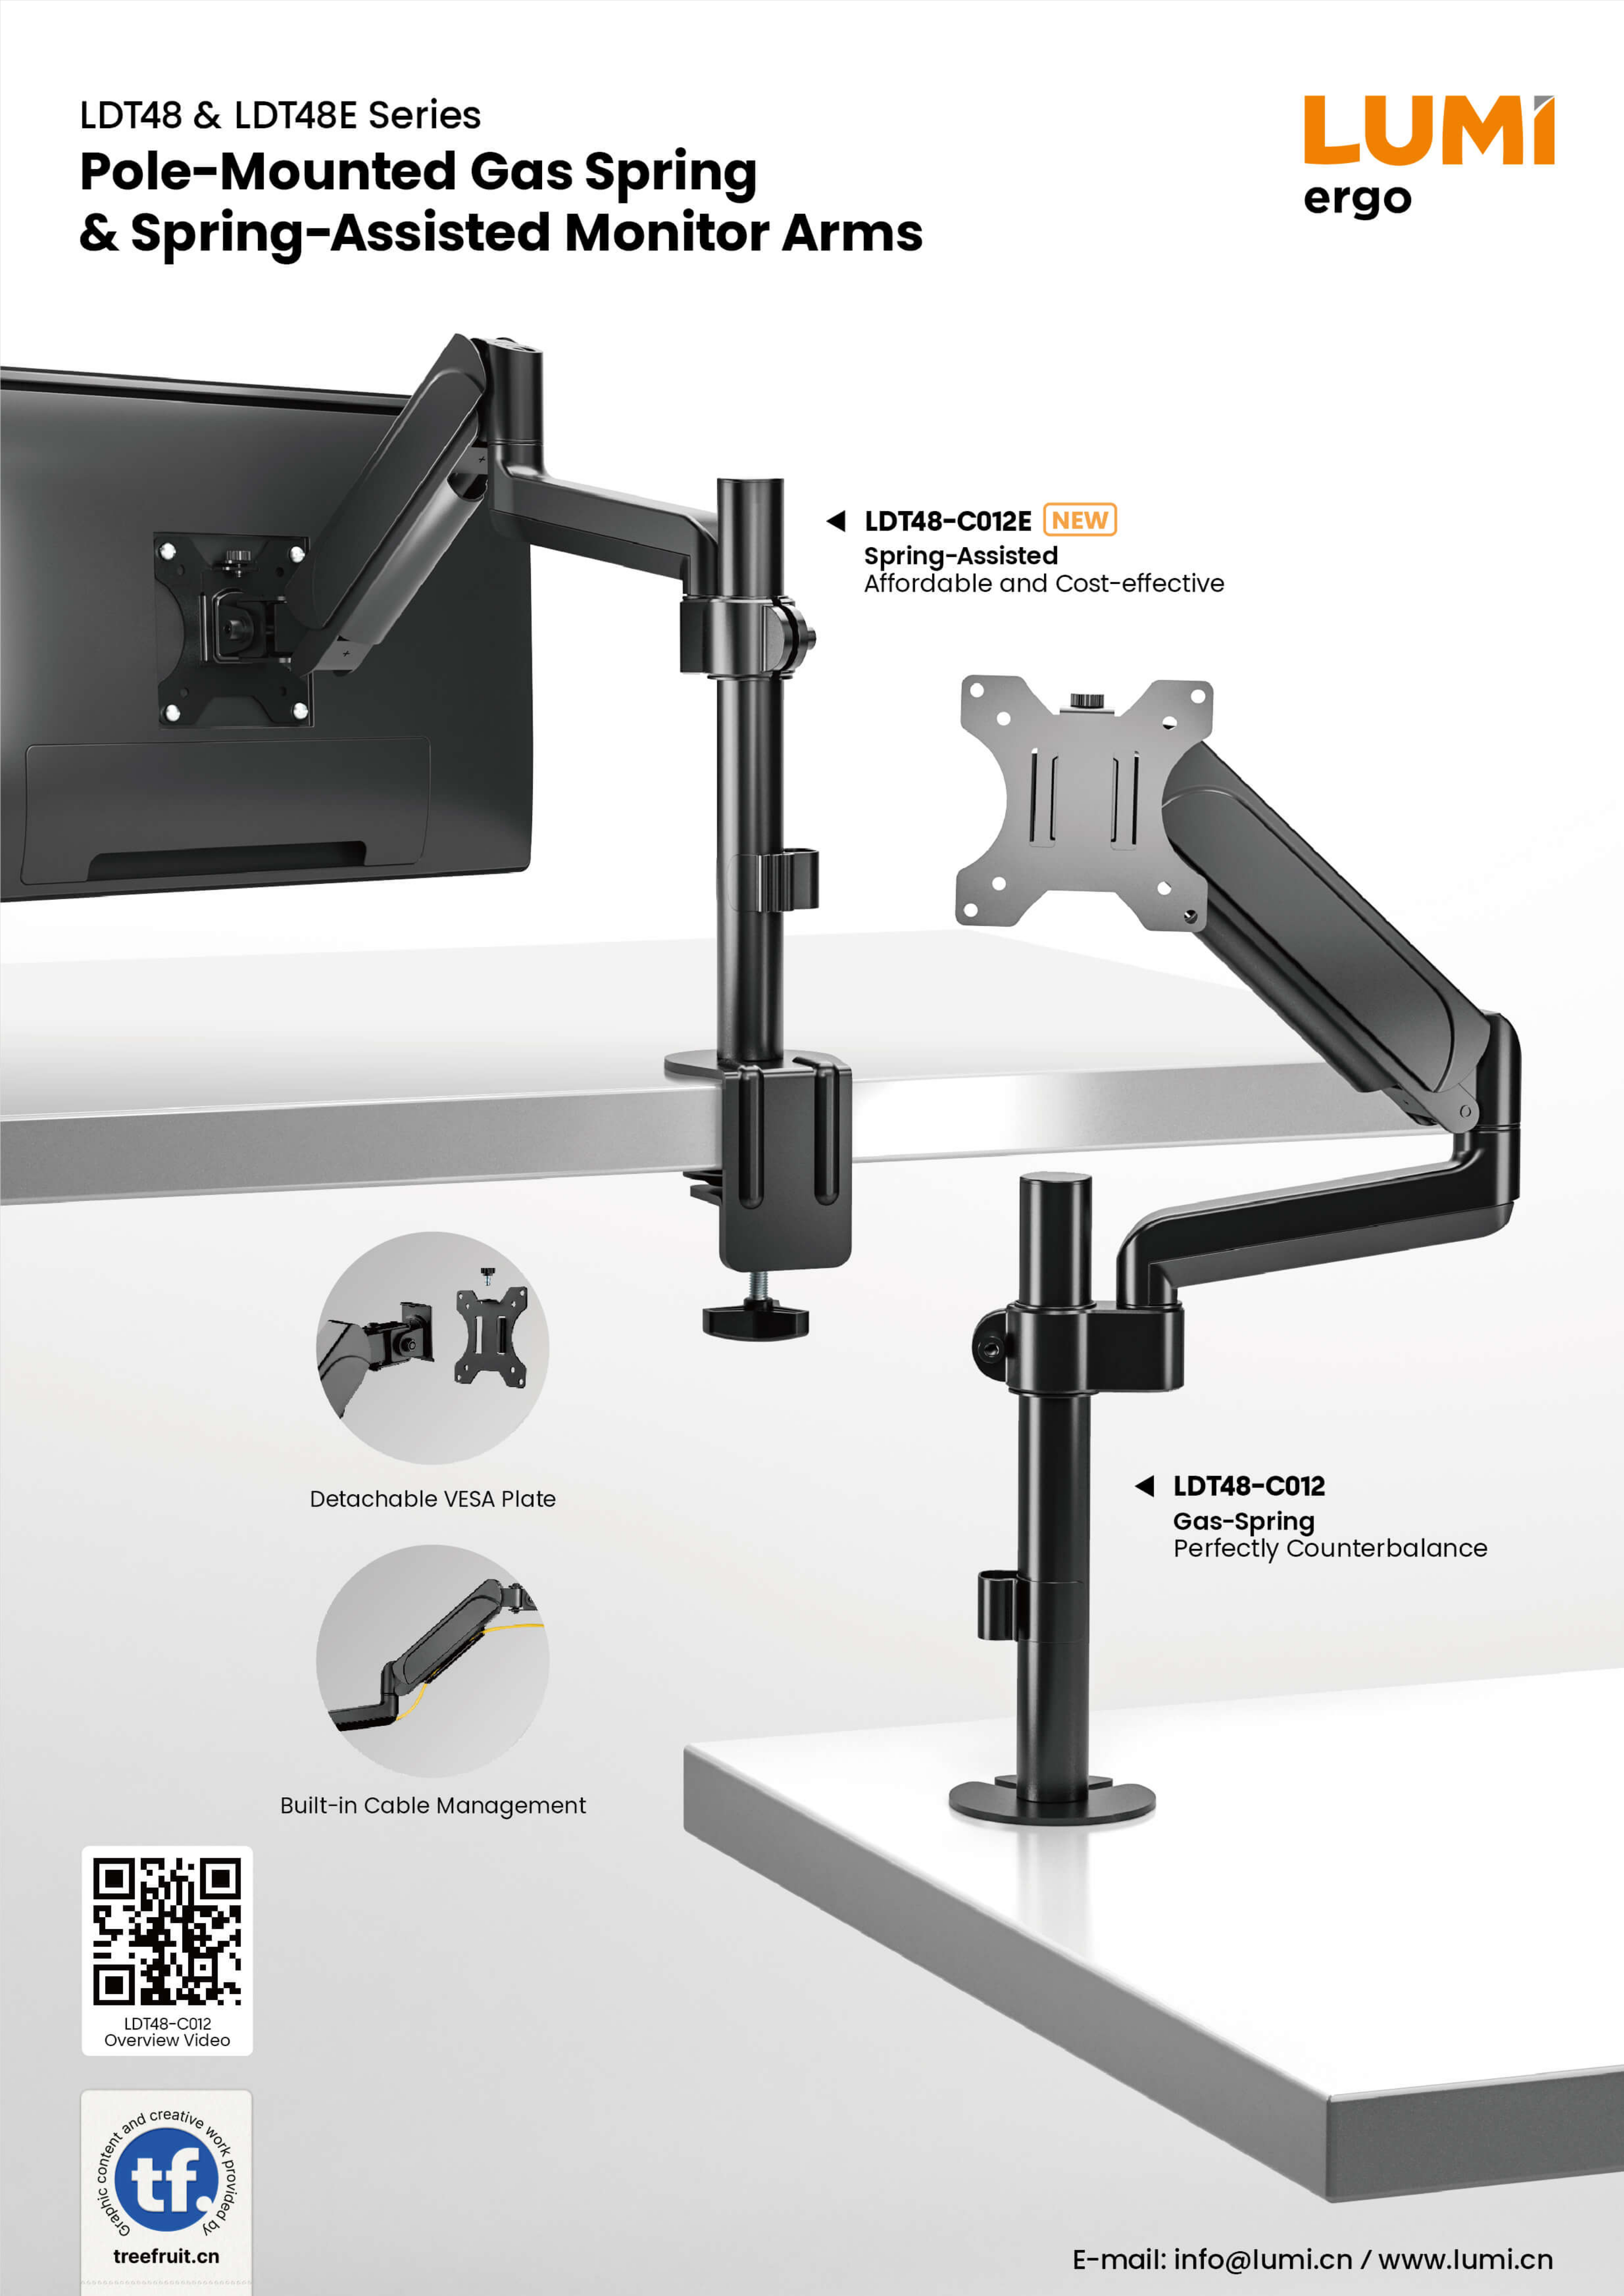 LDT48E Series Pole-Mounted Spring-Assisted Monitor Arms